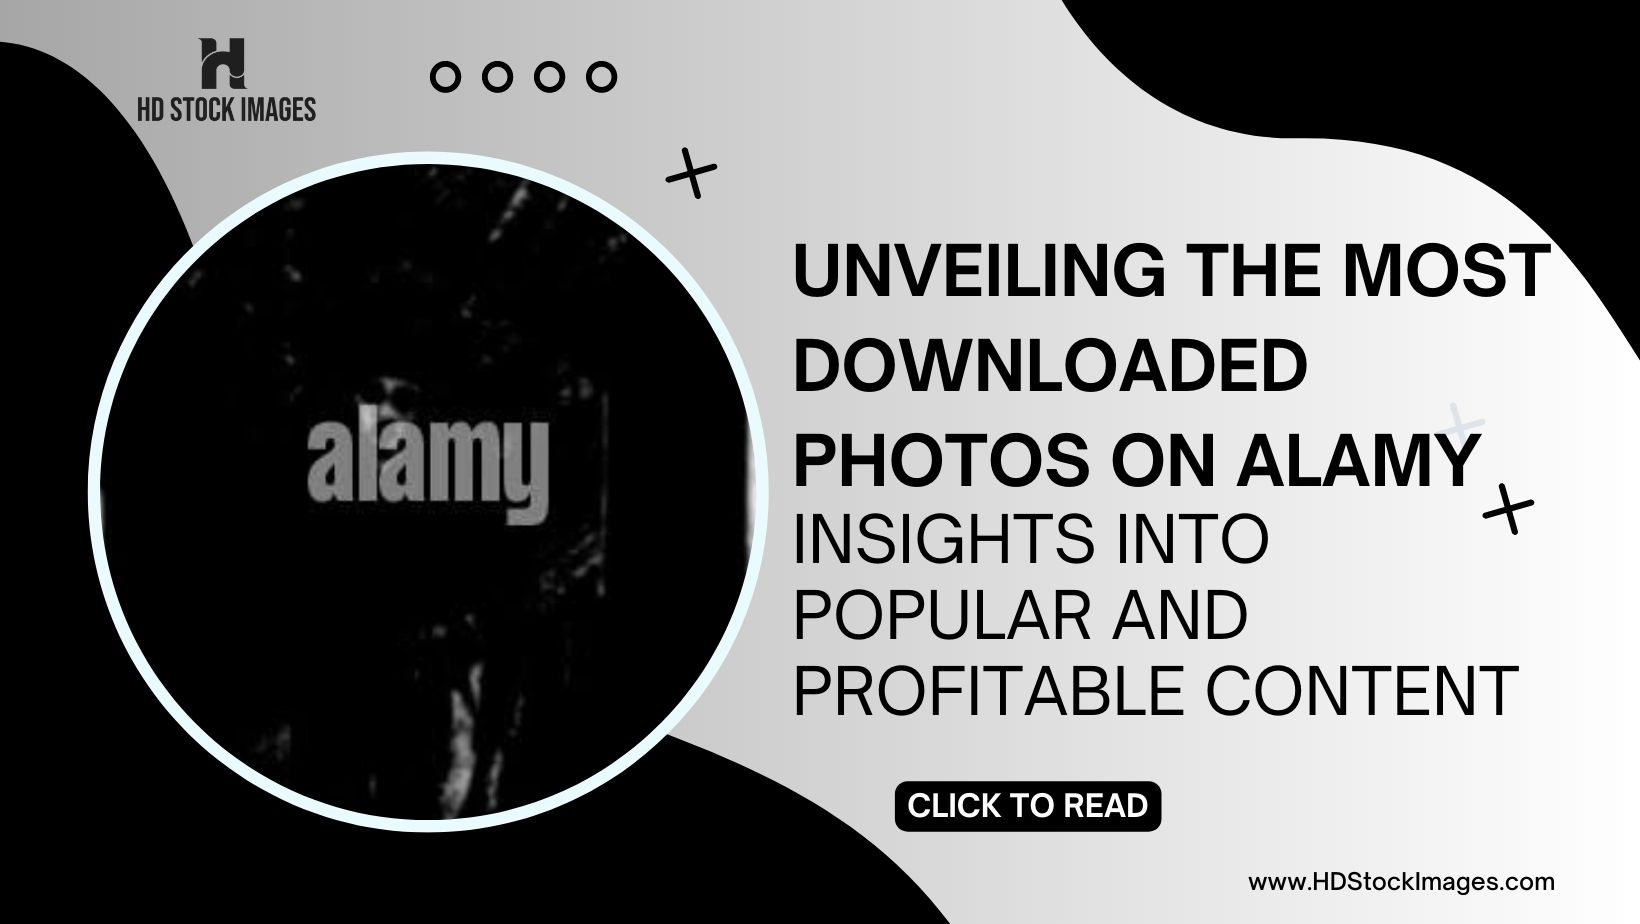 Unveiling The Most Downloaded Photos on Alamy: Insights into Popular and Profitable Content